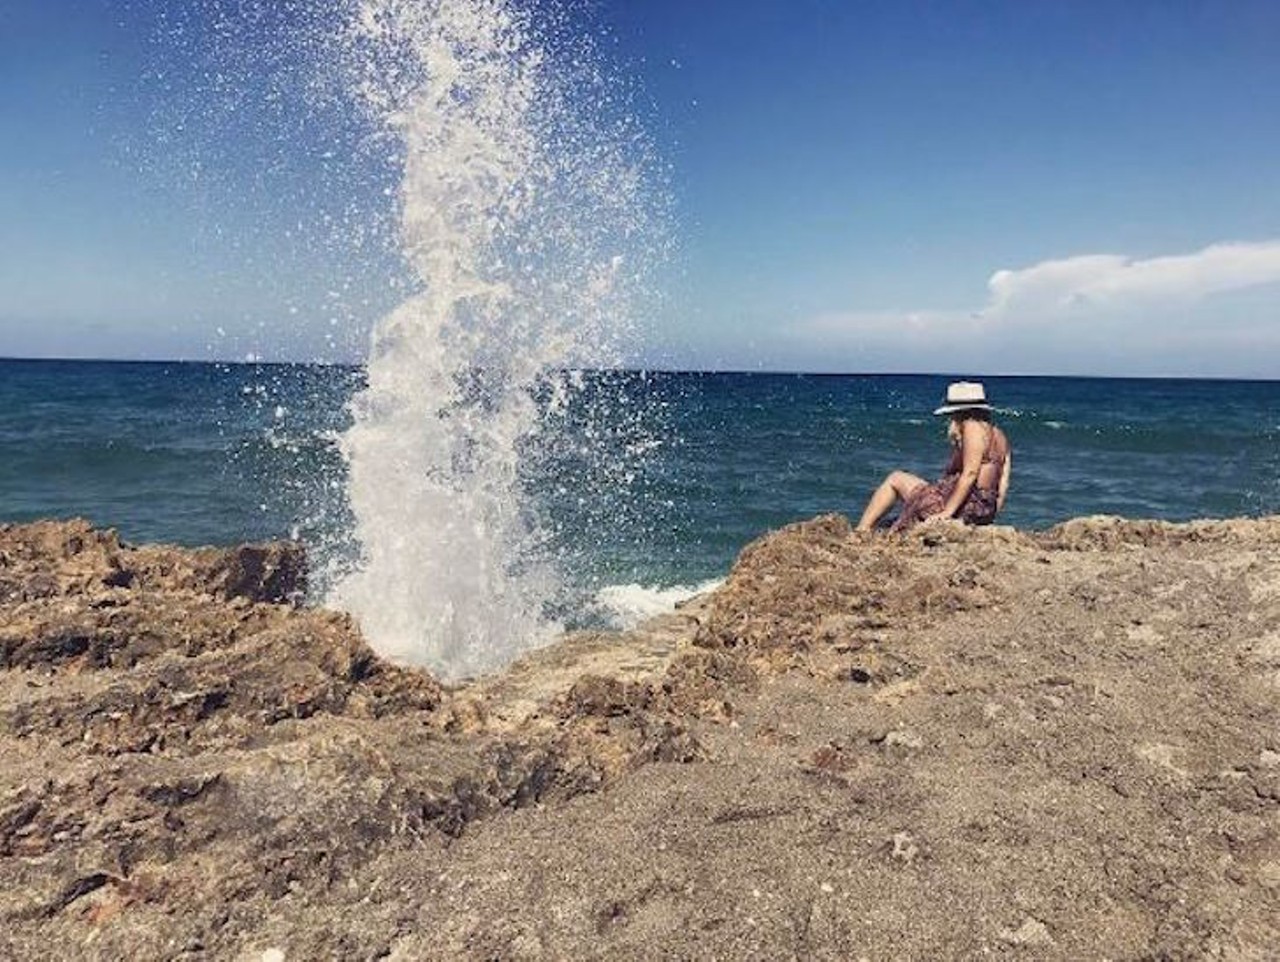 Blowing Rocks Preserve
Driving distance from Orlando: 2 hours 30 minutes  
A marvel of Floridian geology, during extreme high tides and after winter storms seas break against the rocks and force plumes of saltwater up to 50 feet skyward.
Photo via meli.dealmagro/Instagram